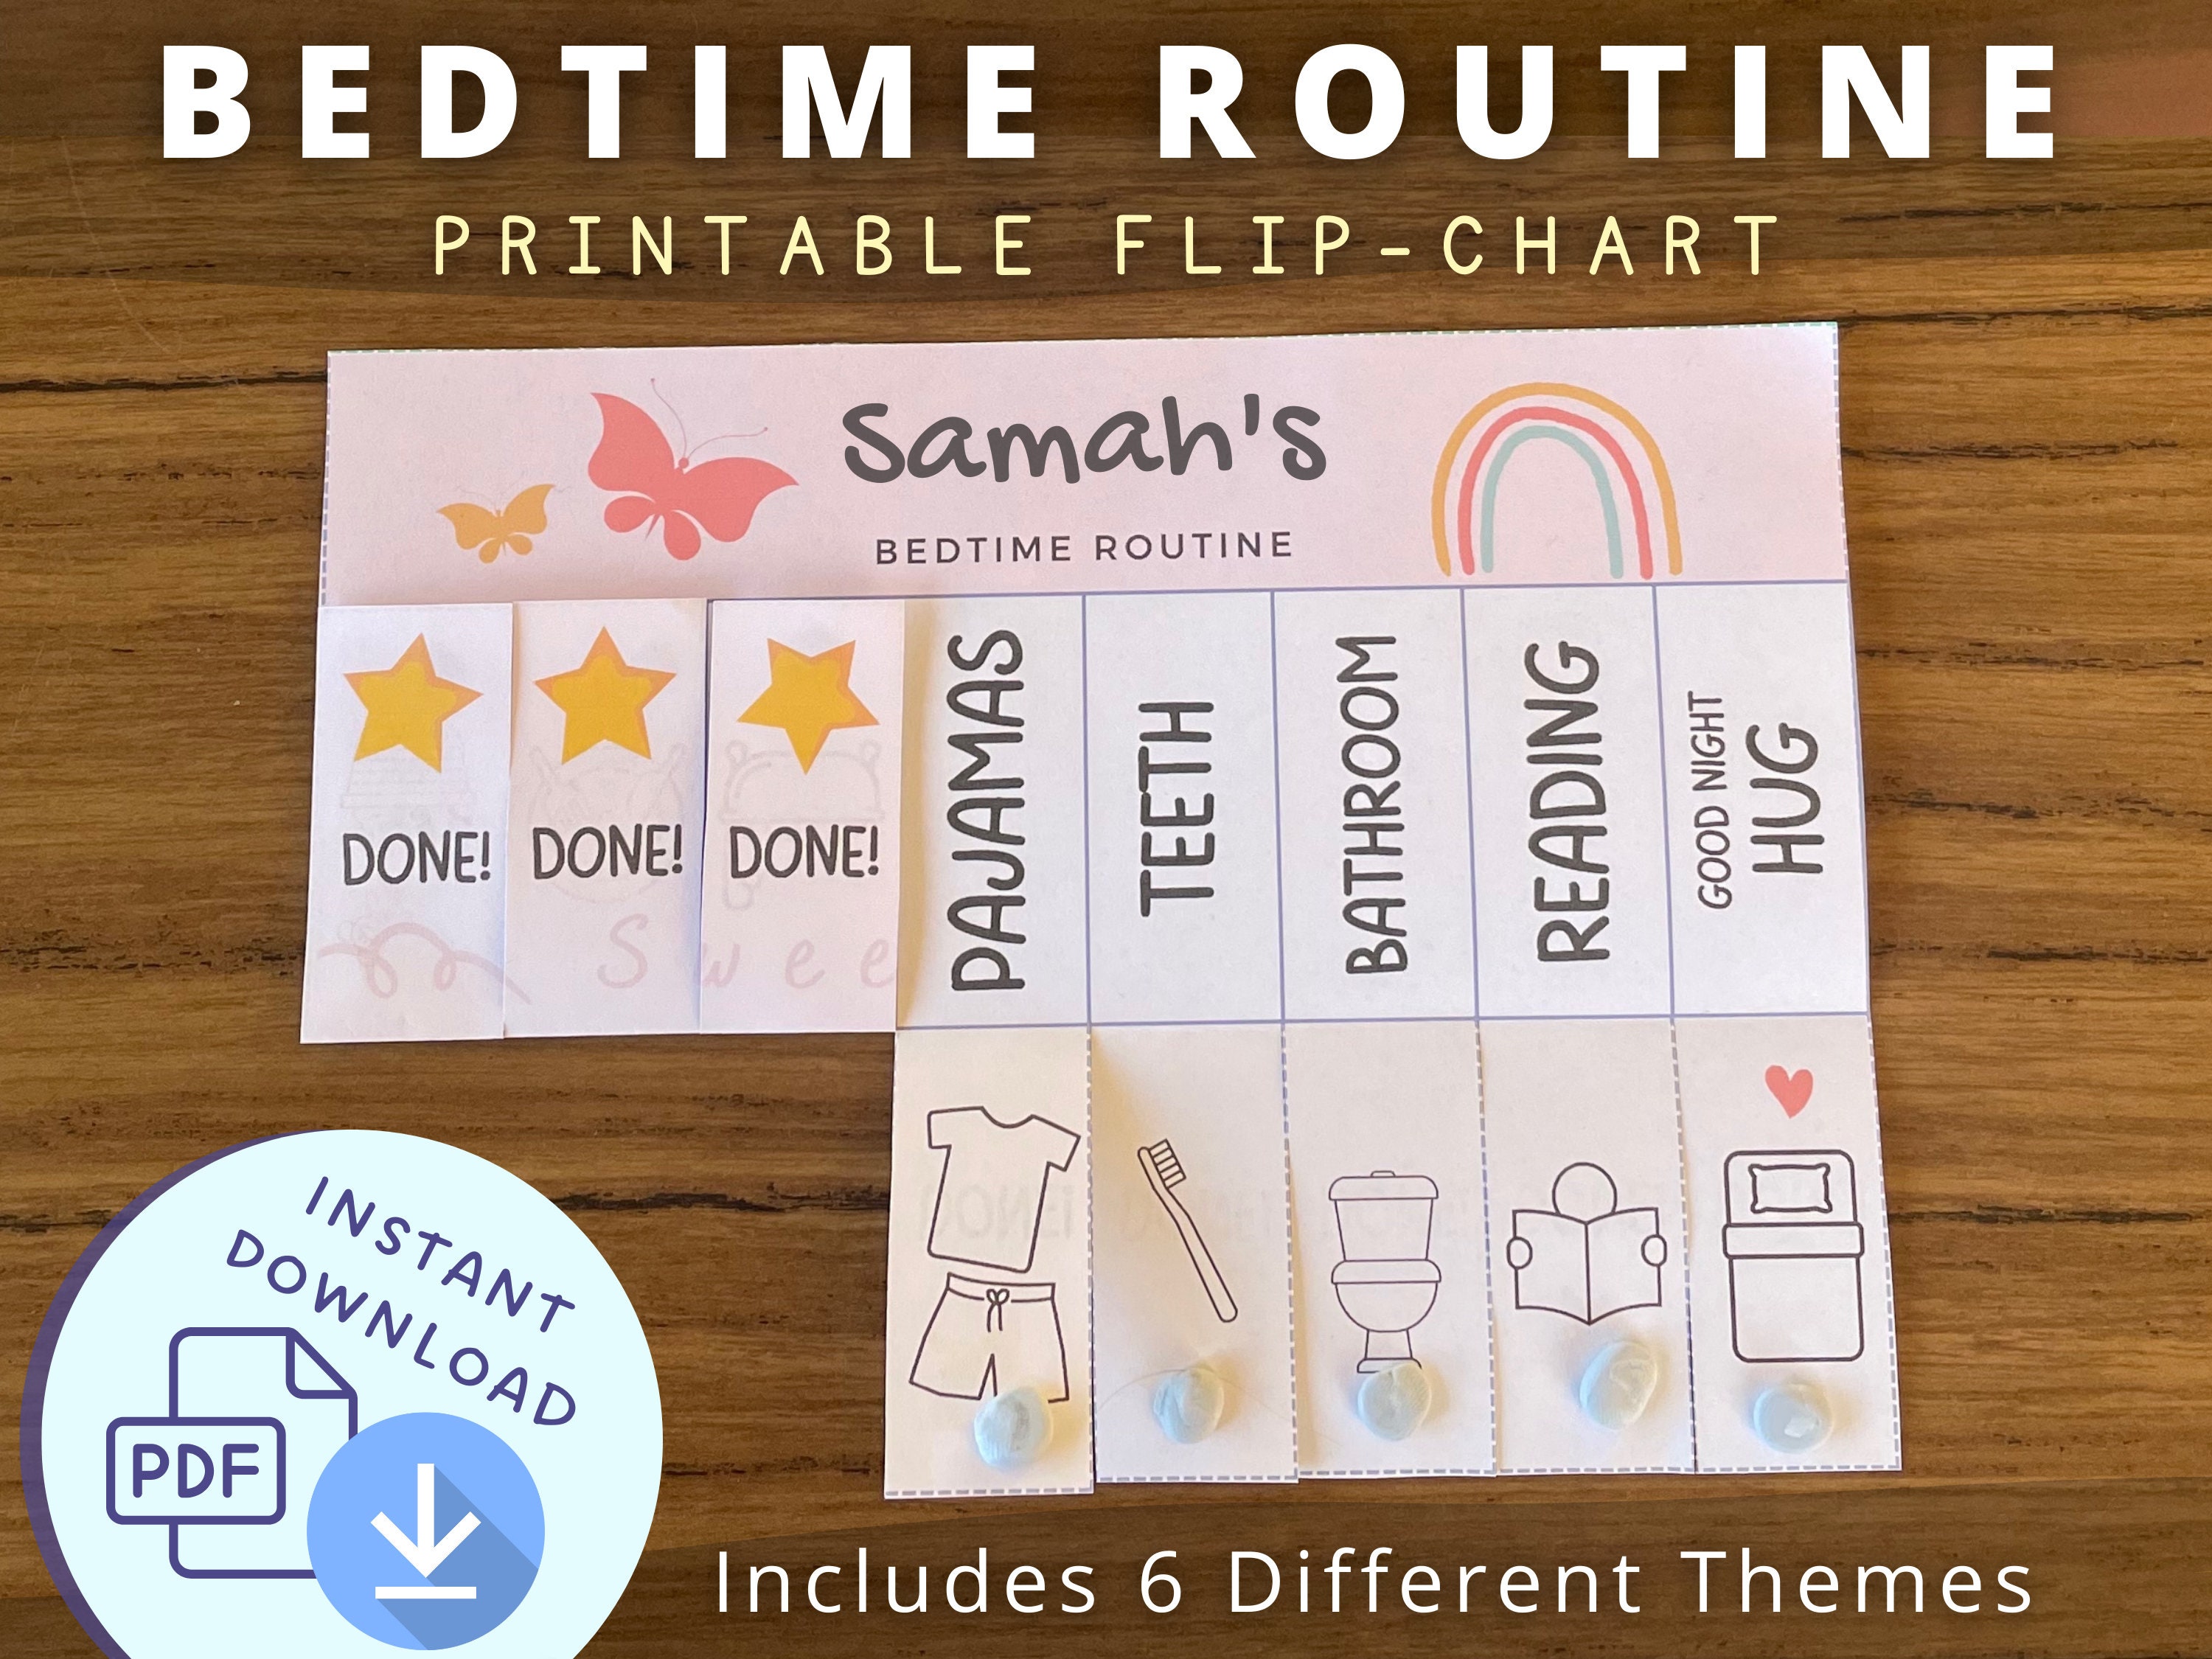 toddler-routine-bedtime-routine-chart-visual-schedule-etsy-australia